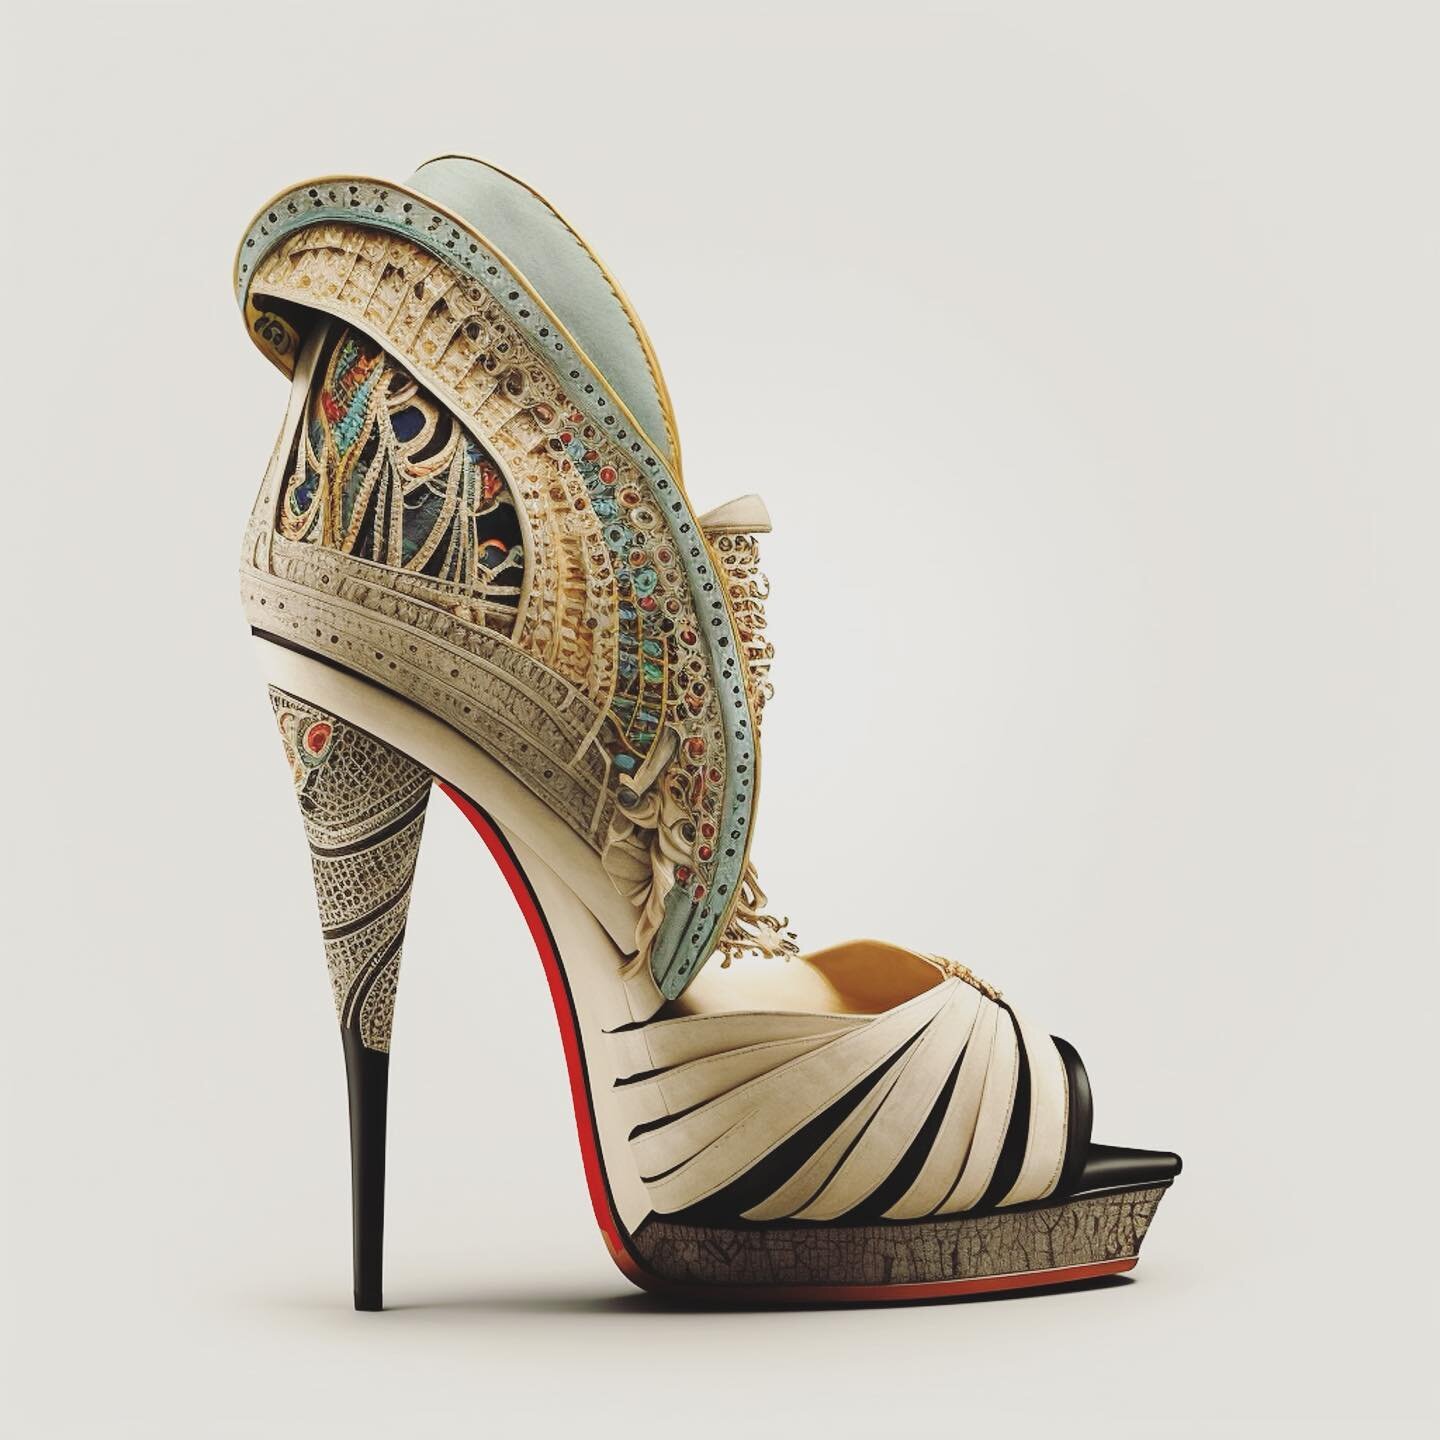 &quot;Unwrapping the ultimate fashion statement with these #ChristianLouboutin inspired heels, featuring the iconic #mummy from the classic horror film. Perfect for any #Halloween look. #horrorfashion #mummymovies #louboutin&quot; 🎥💀🔥